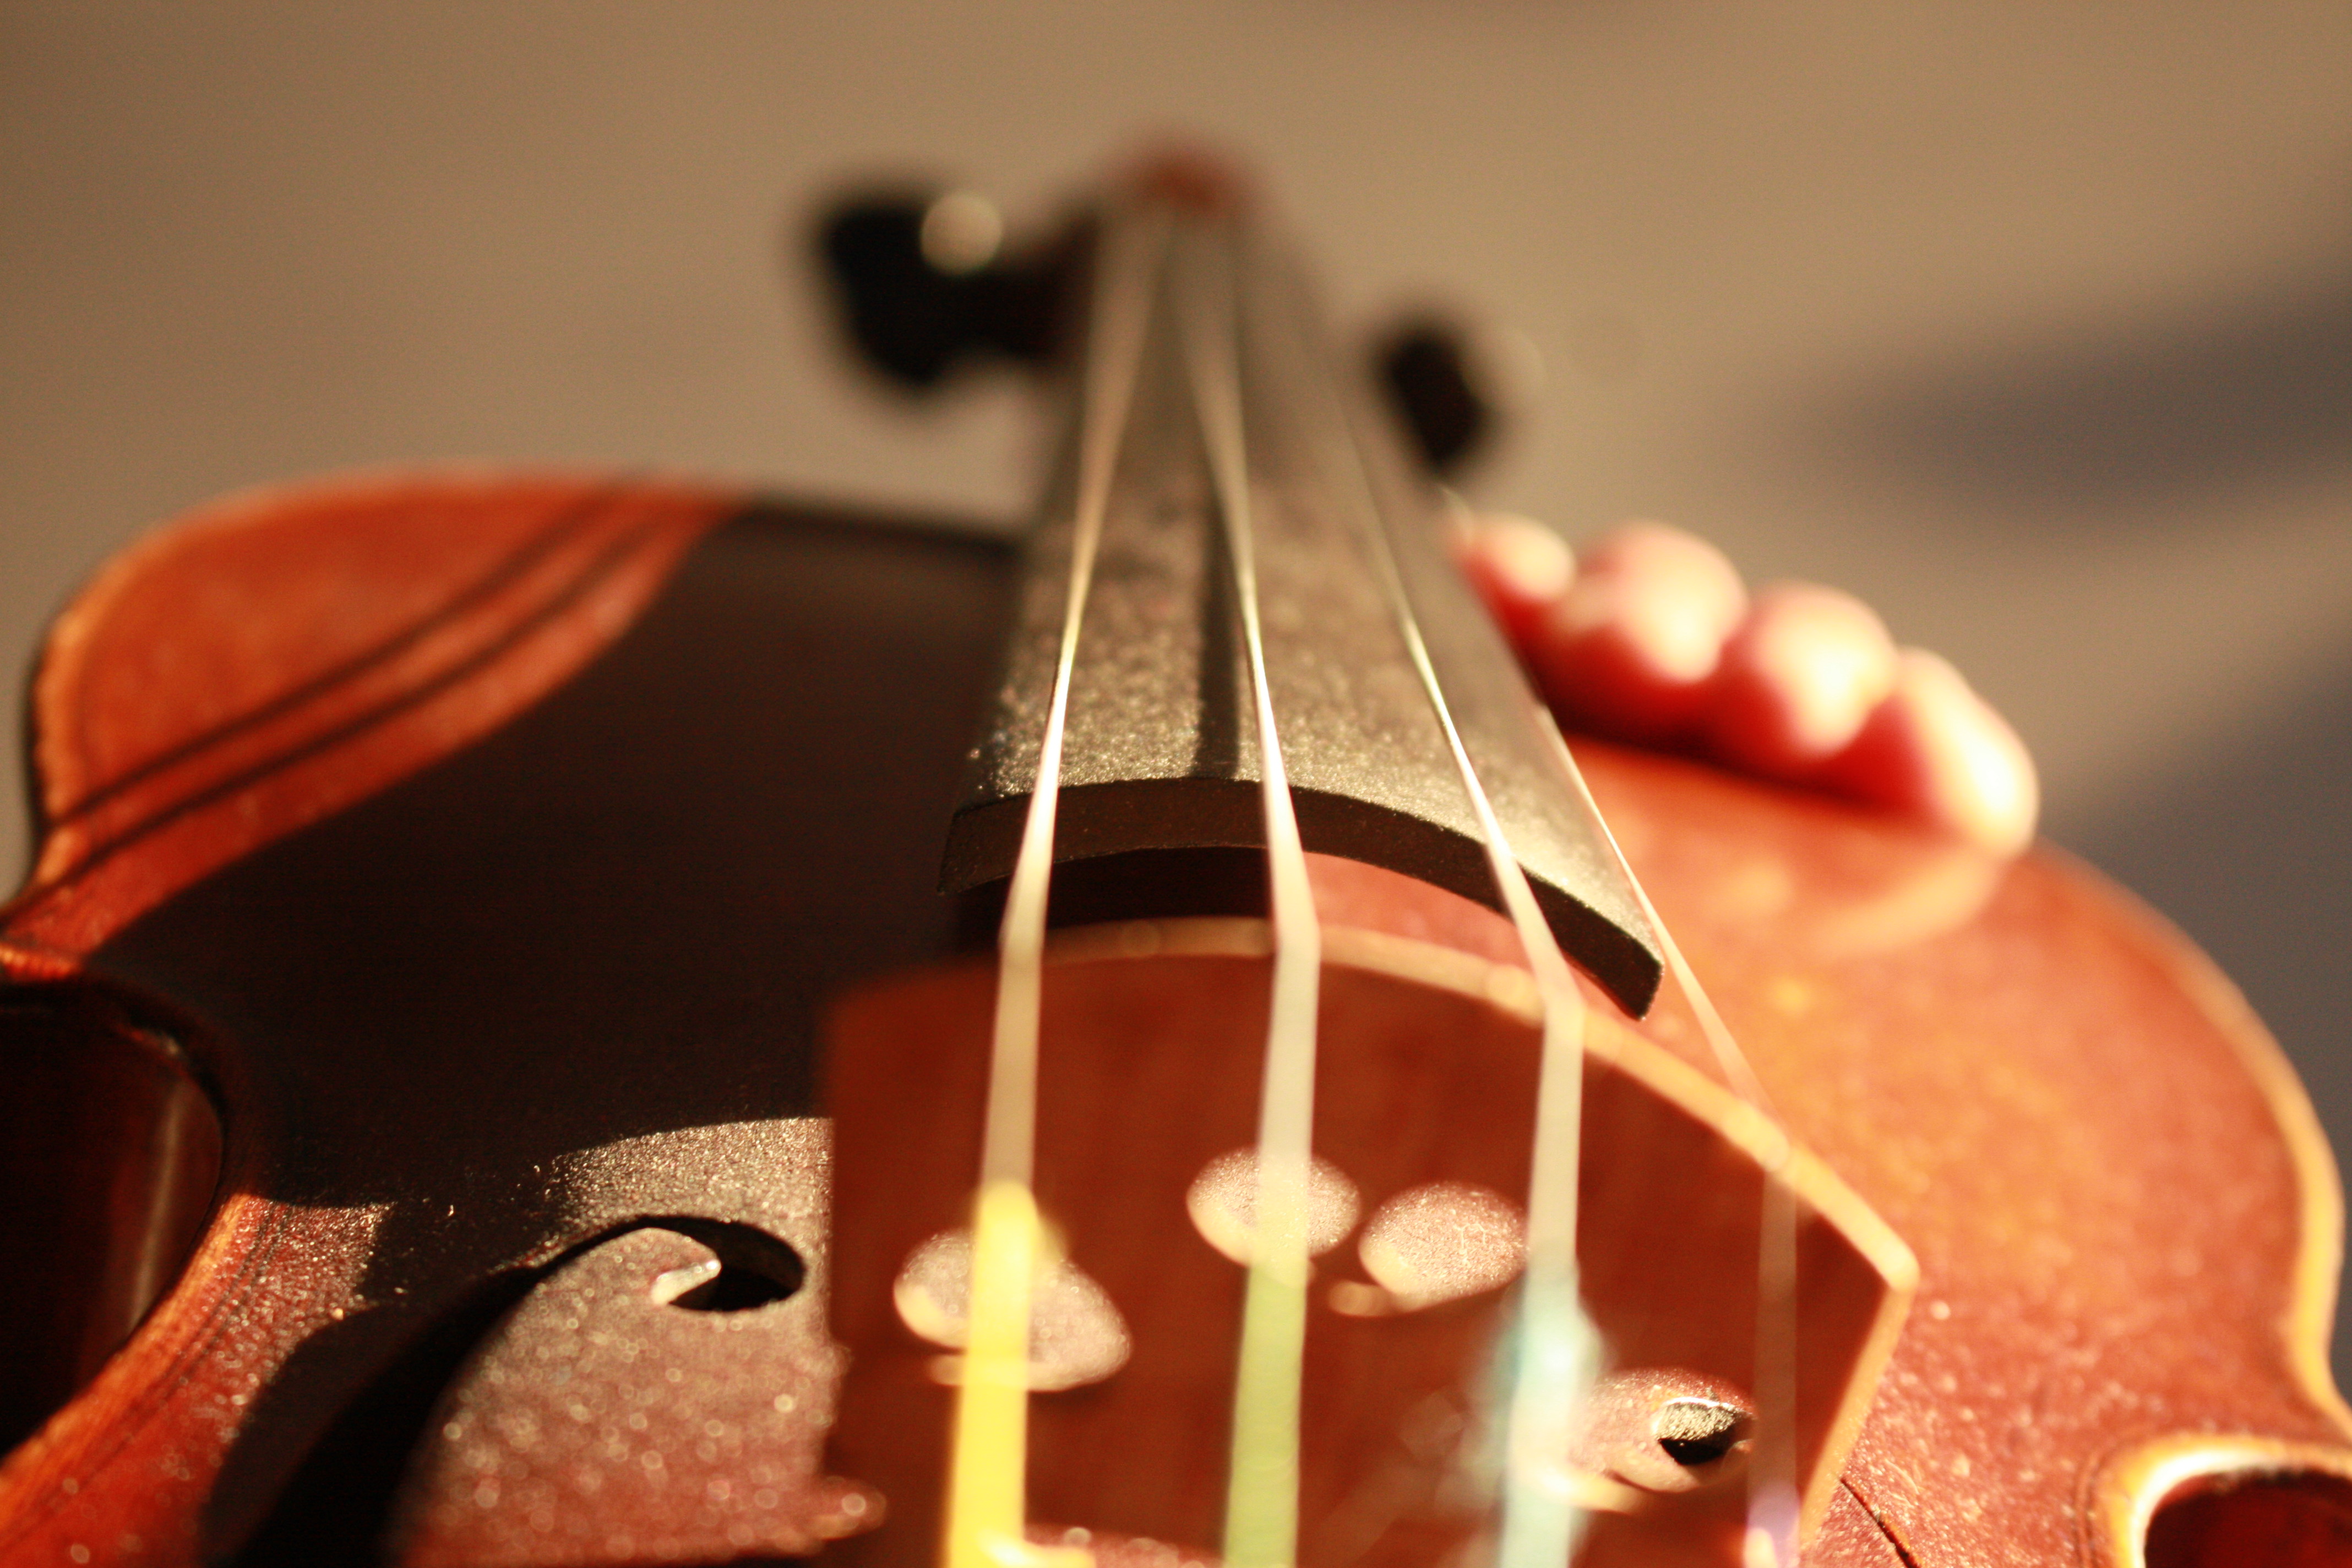 View of violin neck from the strings, fingers holding one edge